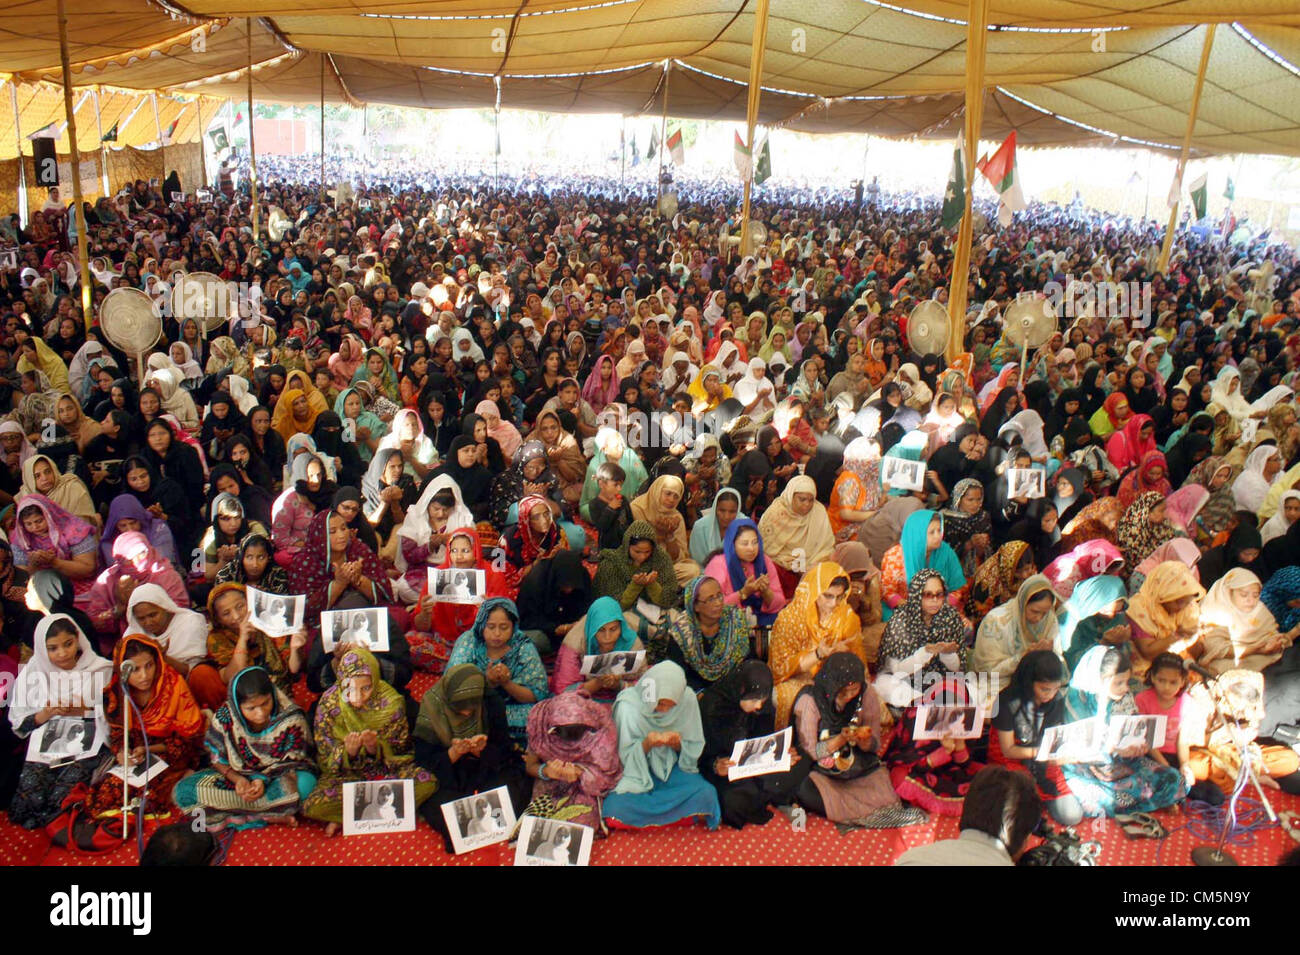 Women prayer for Malala Yousaf Zai during a pray  ceremony held at Jinnah Ground organized by Muttehda Qaumi Movement (MQM), in Karachi  on Wednesday, October 10, 2012. Malala Yousaf Zai, a child rights activist and National Peace  Award winner, was critically injured, along with another girl student, after a gunman shot her on  Tuesday in Mingora town of district Swat while she returning home from school on a van. Stock Photo